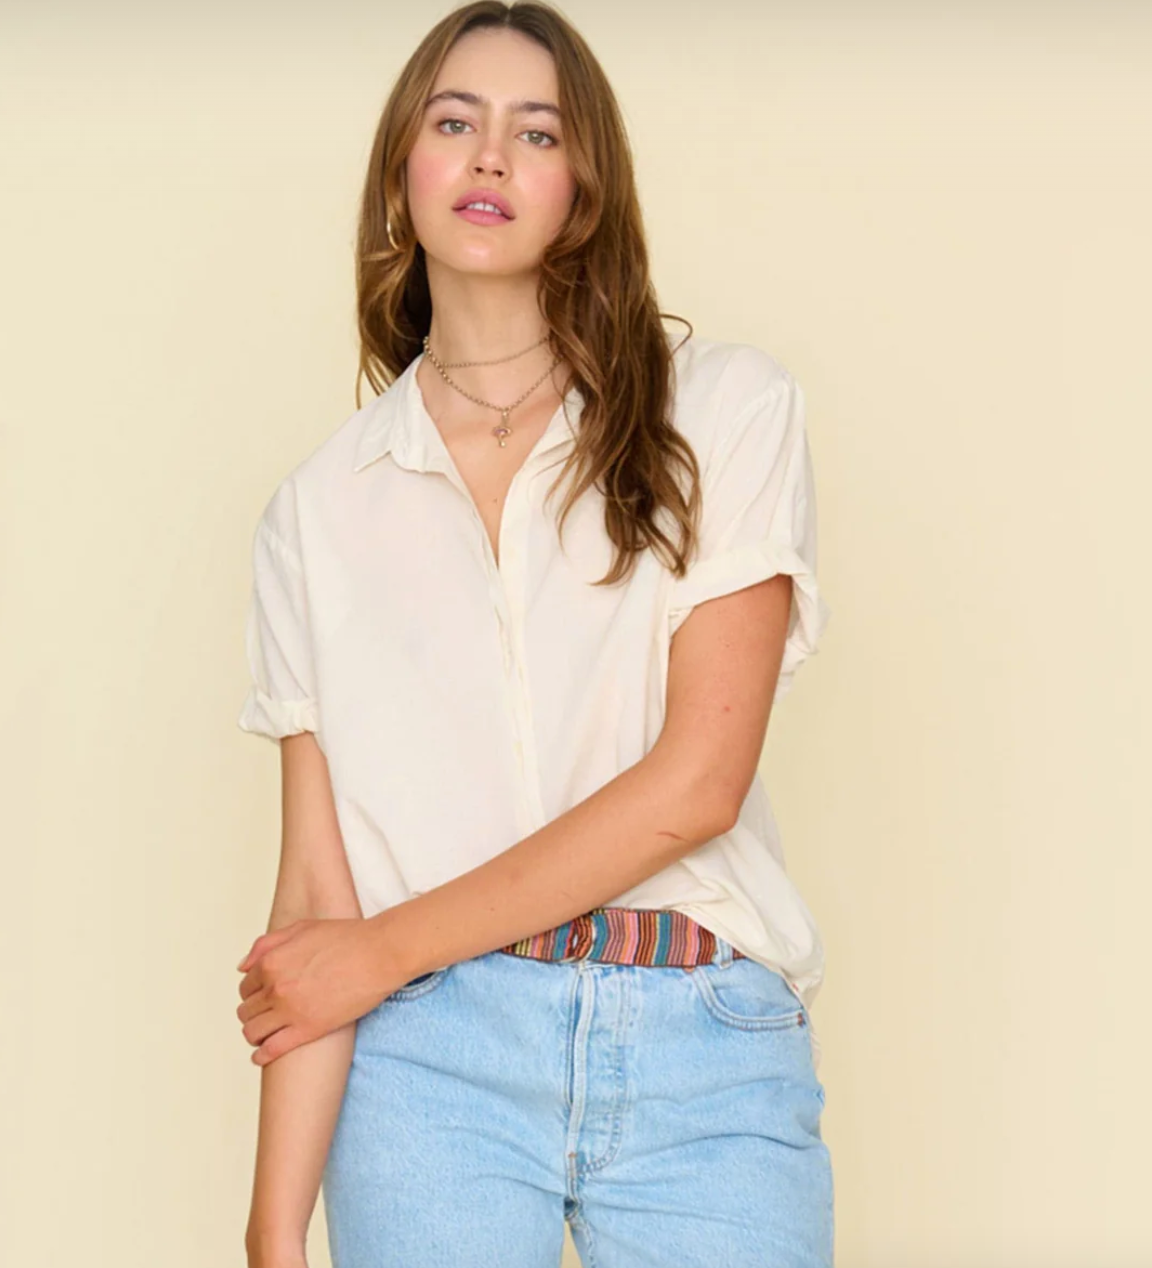 A person with long brown hair stands in front of a beige background reminiscent of a Scottsdale, Arizona bungalow. They are wearing a light cream-colored Sand Channing Shirt by Xirena, slightly tucked into light blue jeans with a colorful striped belt peeking out. They have a calm expression and a relaxed posture.